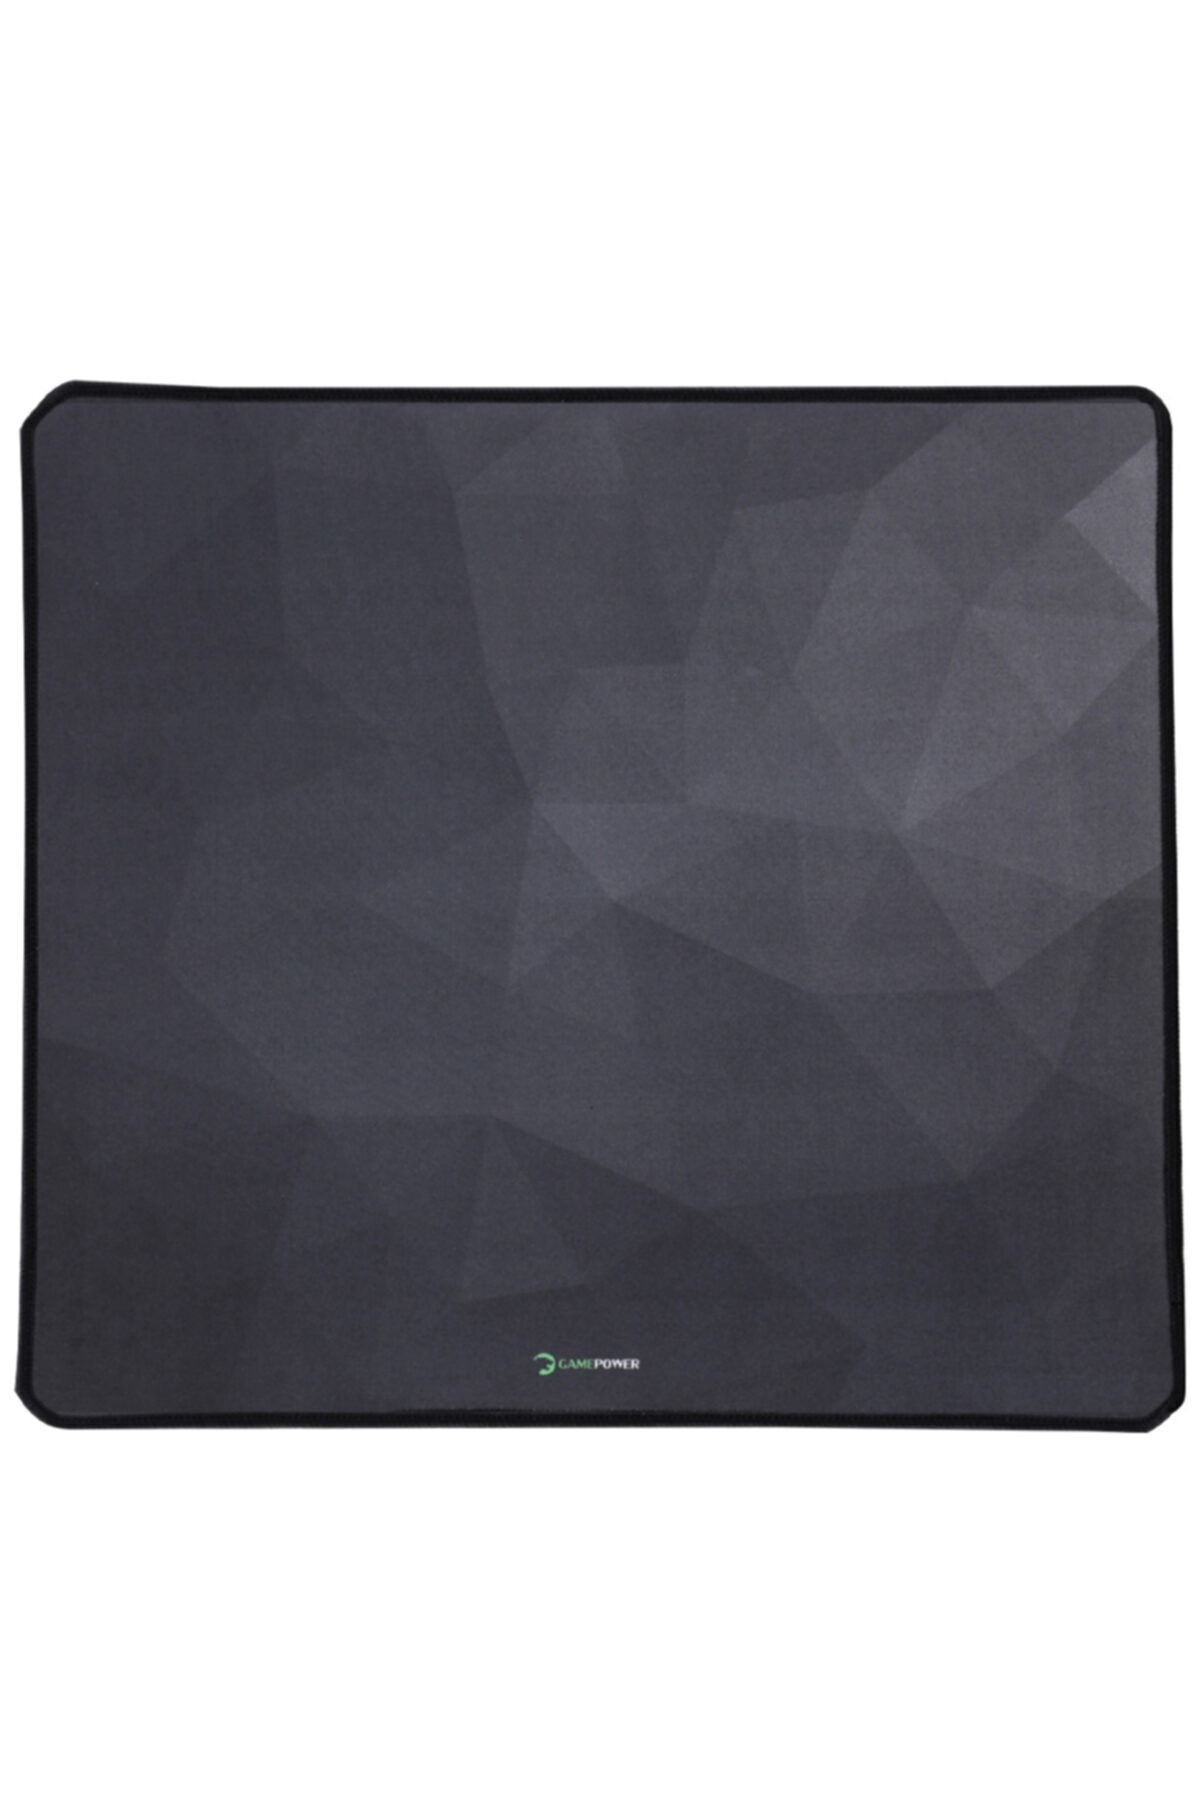 Gamepower Gpr300 300*300*3mm Gaming Mouse Pad